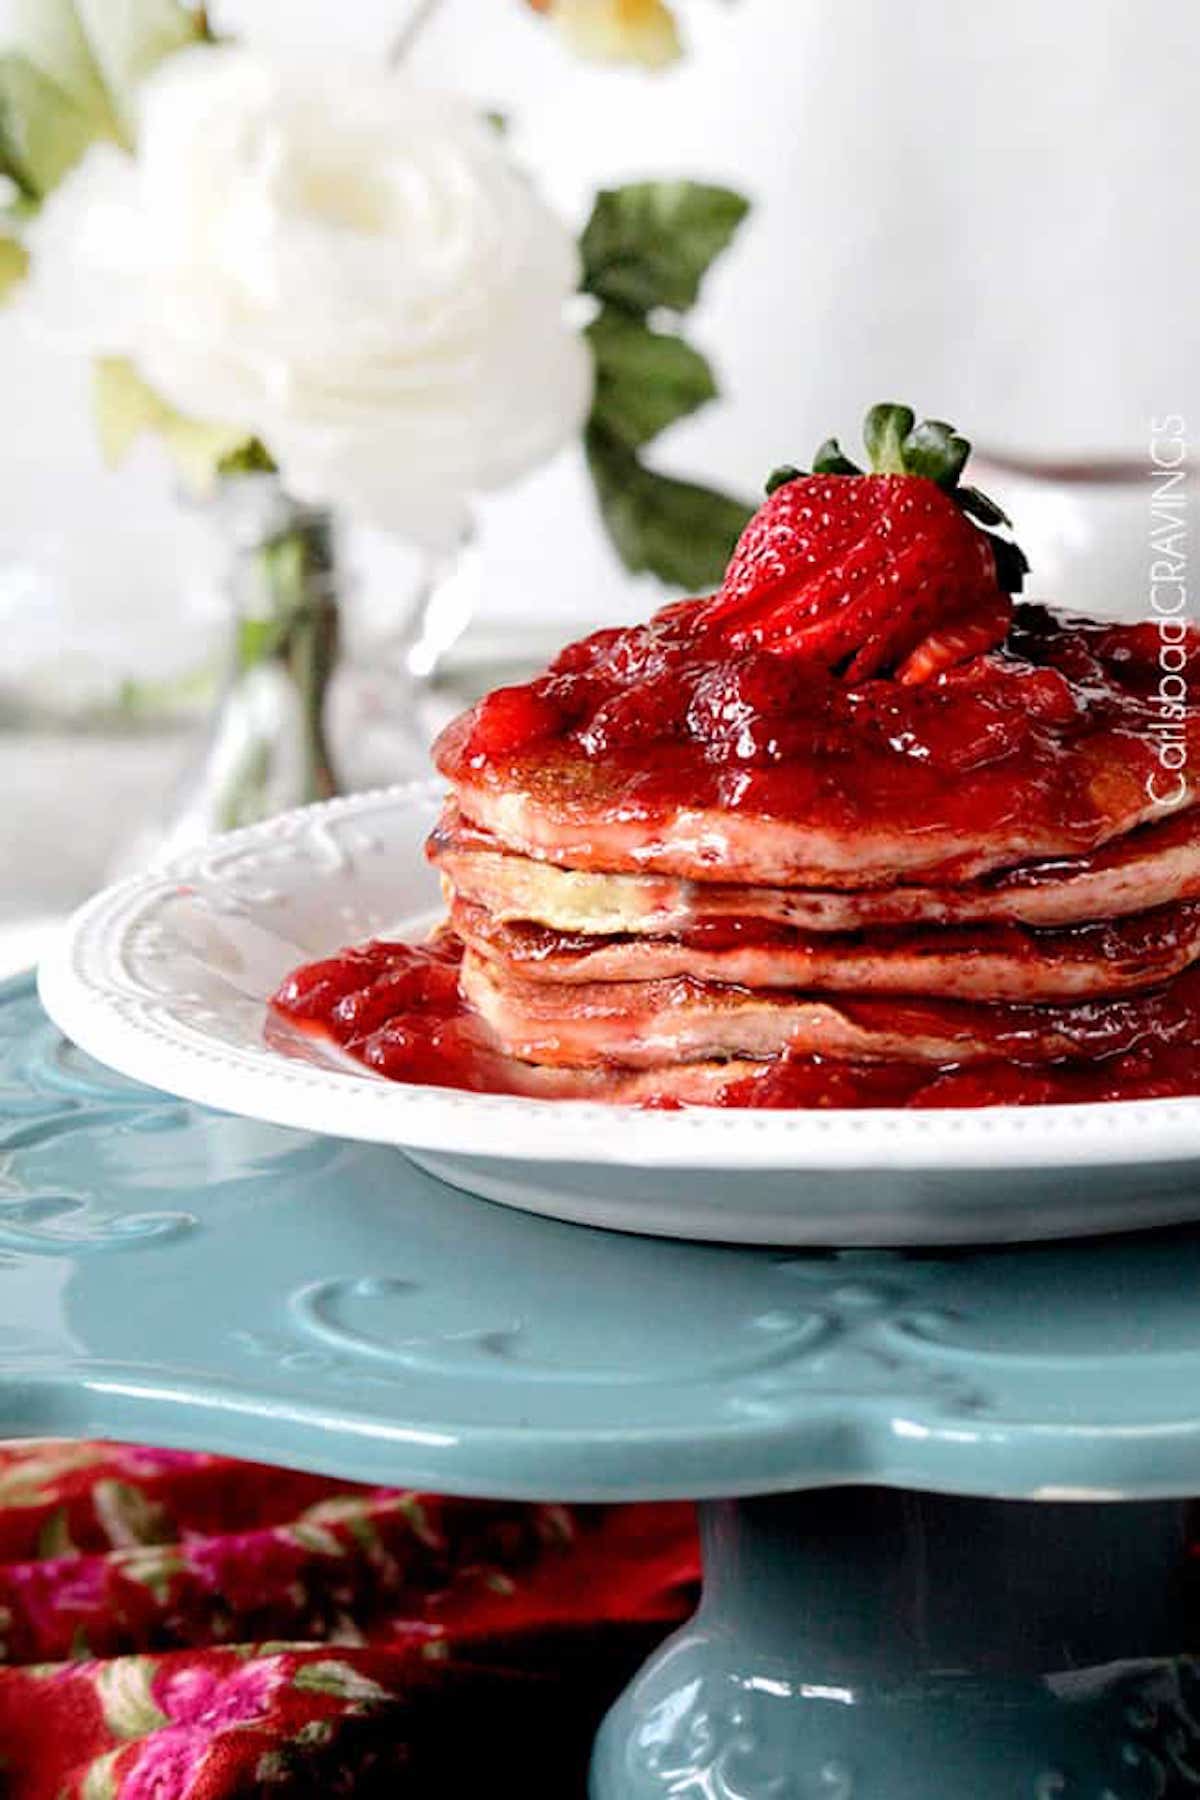 10 Pancakes From Scratch That Are Perfect For Spring